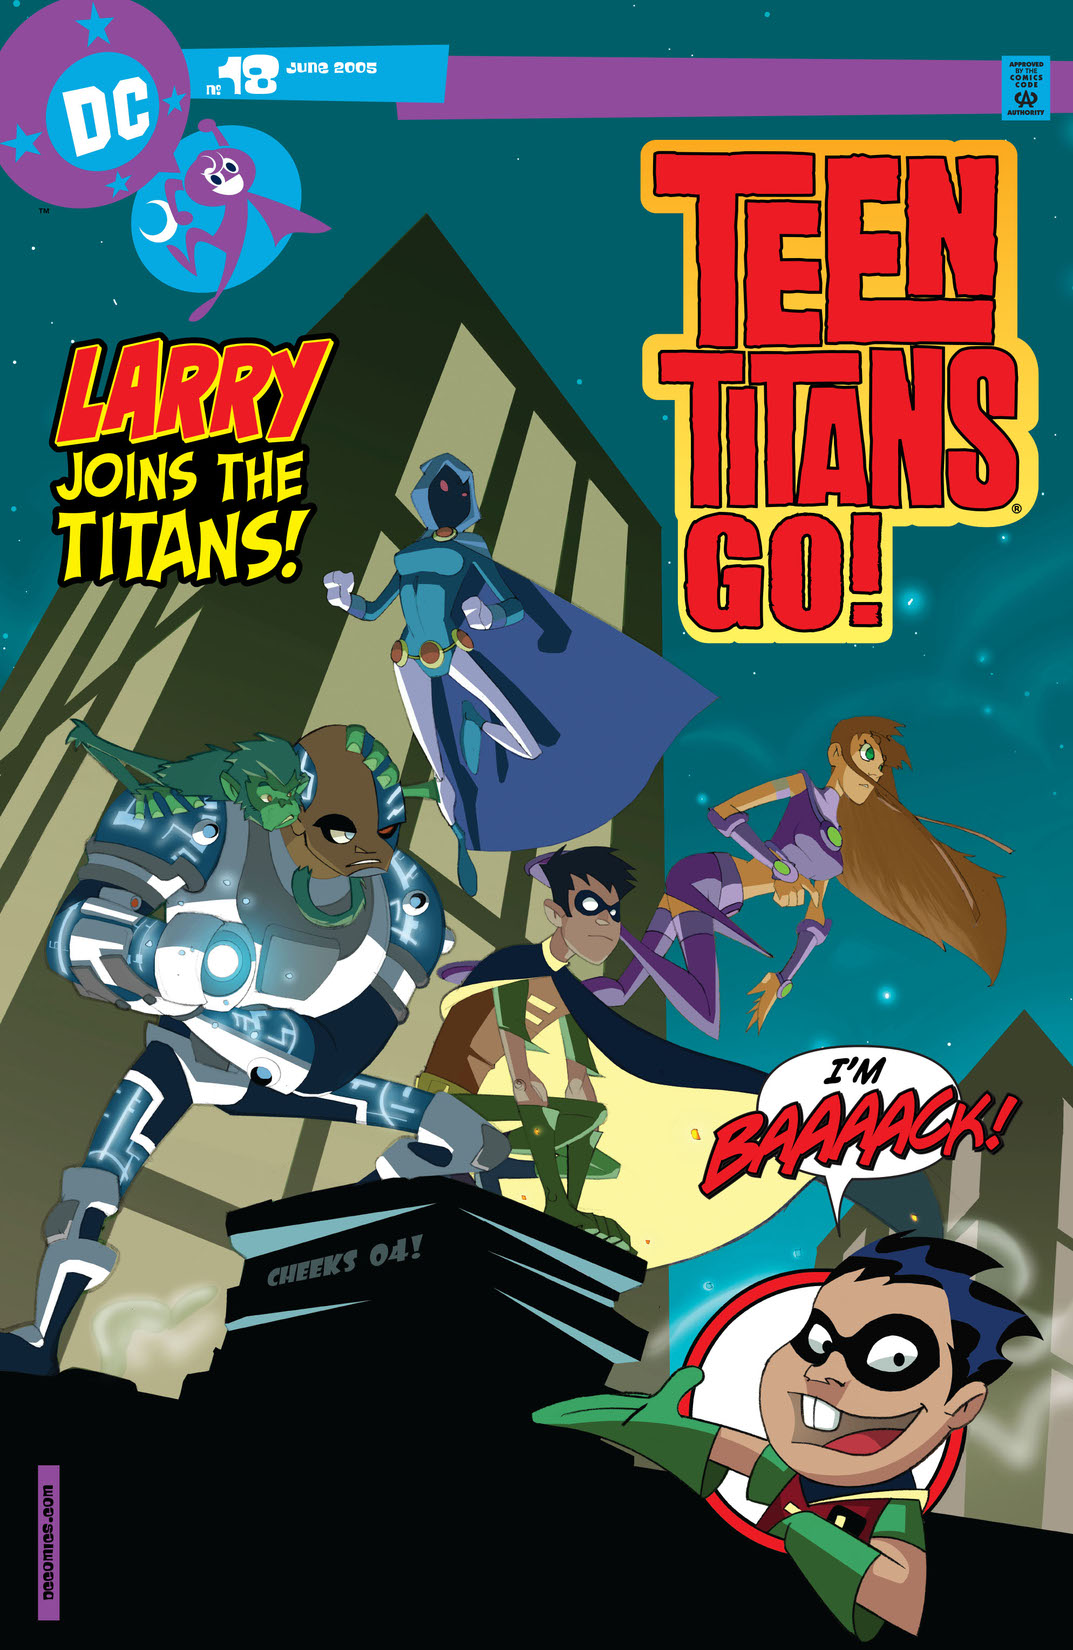 Teen Titans Go! (2003-) #18 preview images